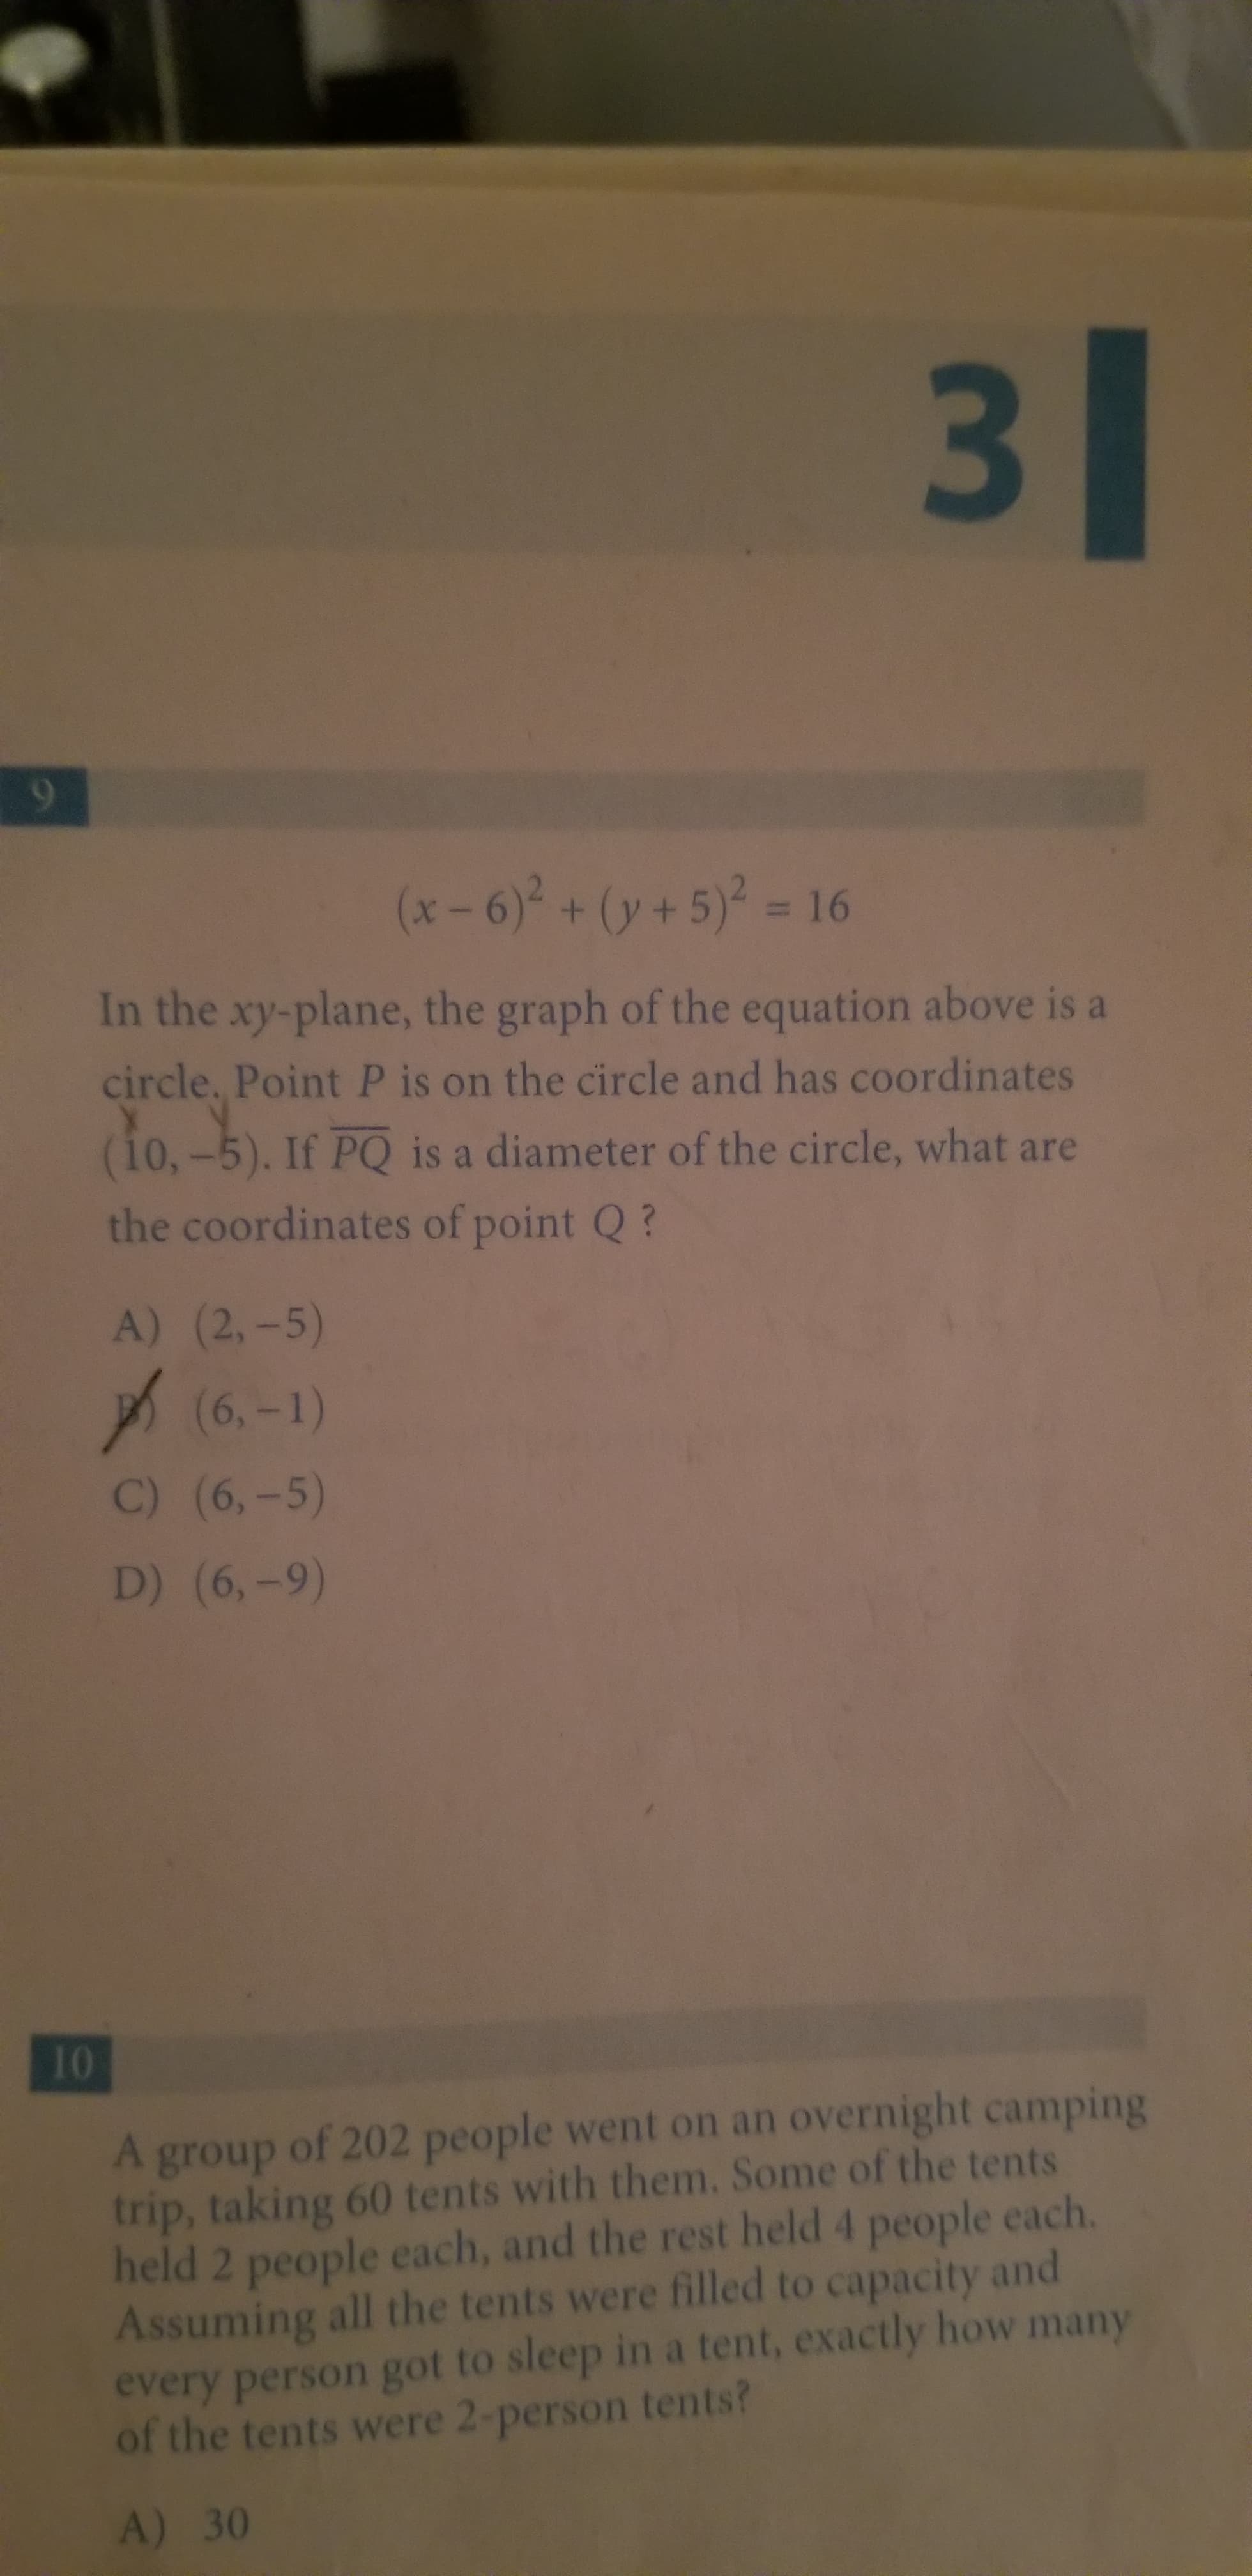 3 1
(x-6)2+(y+5)2 = 16
In the xy-plane, the graph of the equation above is a
circle, Point P is on the circle and has coordinates
(i0,-5). If PQ is a diameter of the circle, what are
the coordinates of point Q?
A) (2,-5)
(6,-1)
C) (6,-5)
D) (6,-9)
10
A group of 202 people went on an overnight camping
trip, taking 60 tents with them. Some of the tents
held 2 people each, and the rest held 4 people each.
Assuming all the tents were filled to capacity and
every person got to sleep in a tent, exactly how many
of the tents were 2-person tents?
A) 30
